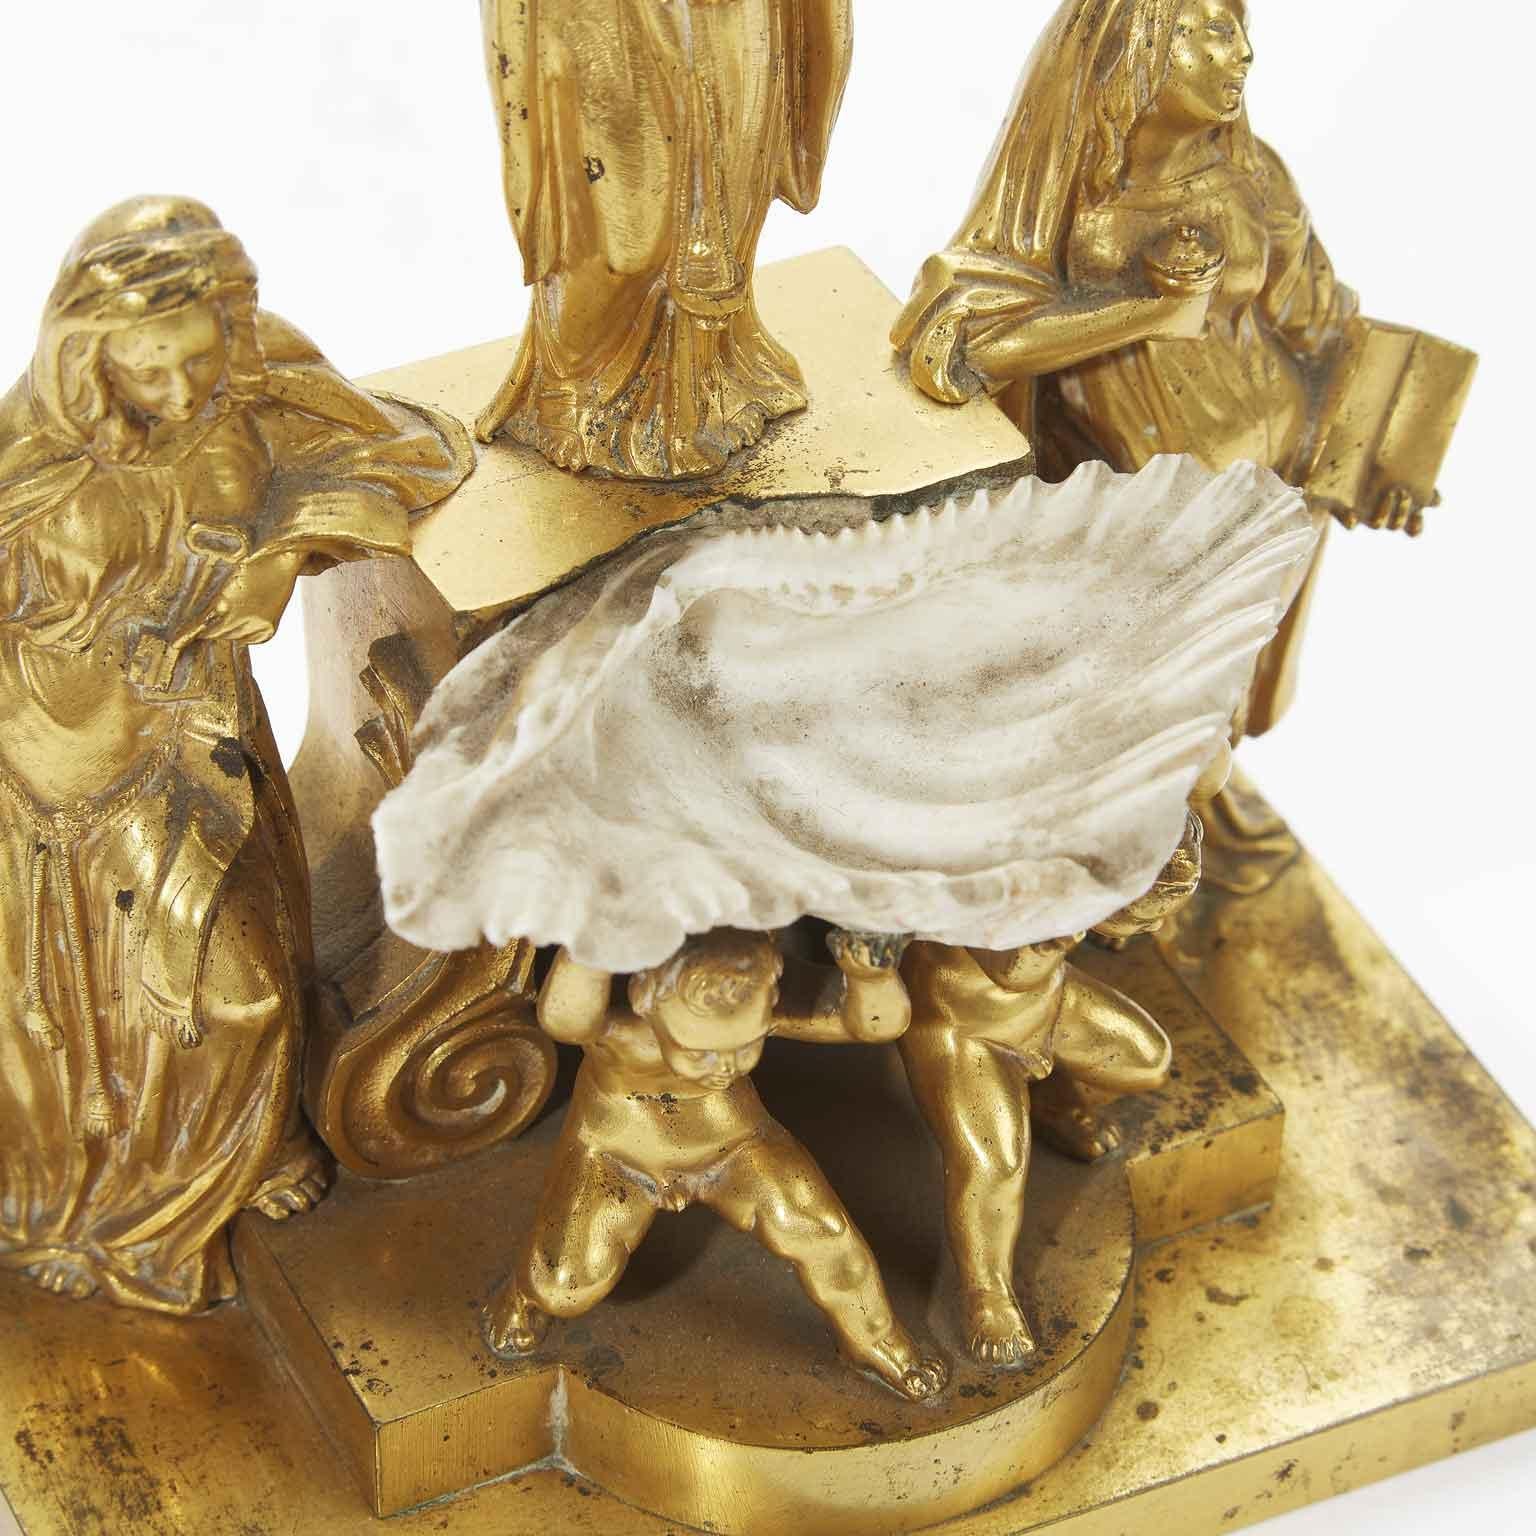 Gilt 19th Century Italian Gilded Holy Water Font with Putti Angel Saints and Shell